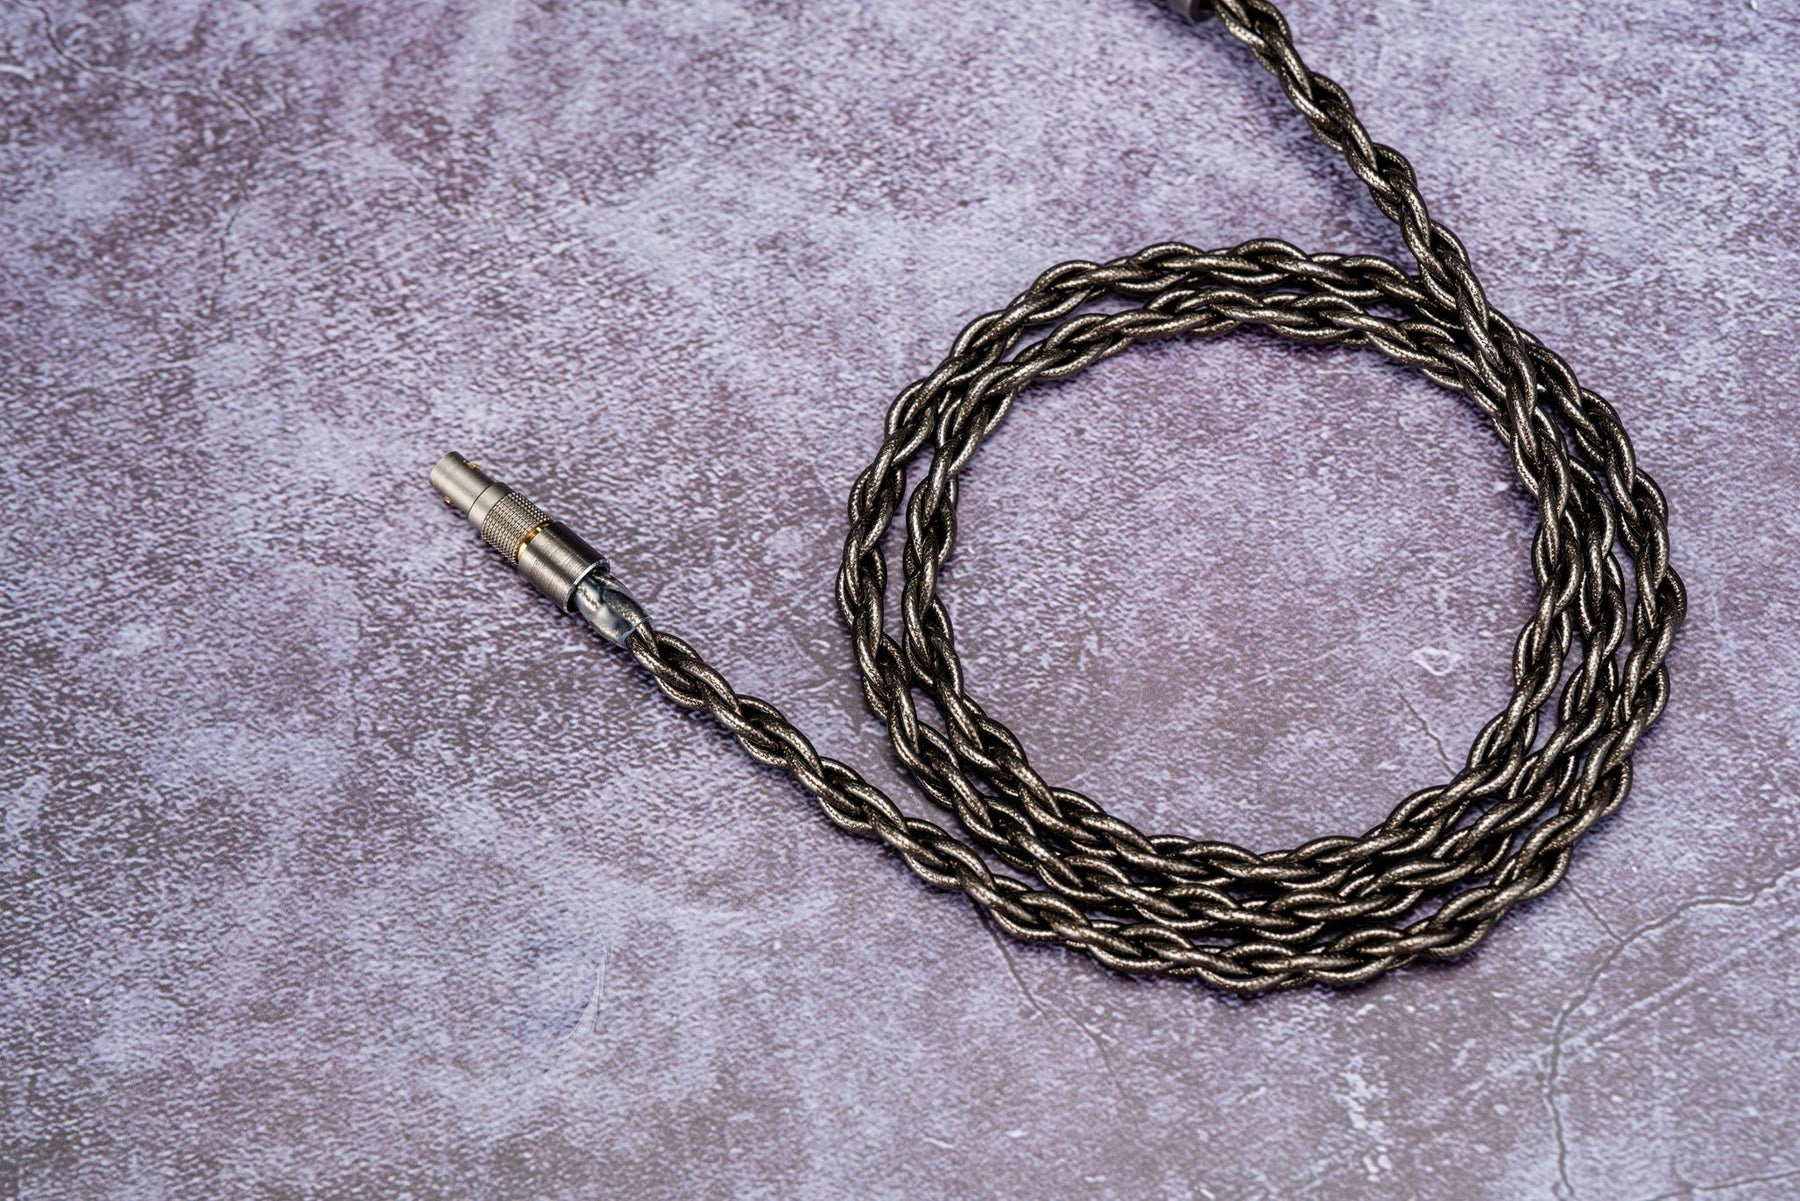 DUNU Hulk Pro 22AWG Monocrystalline Copper IEM Upgrade Cable Available now